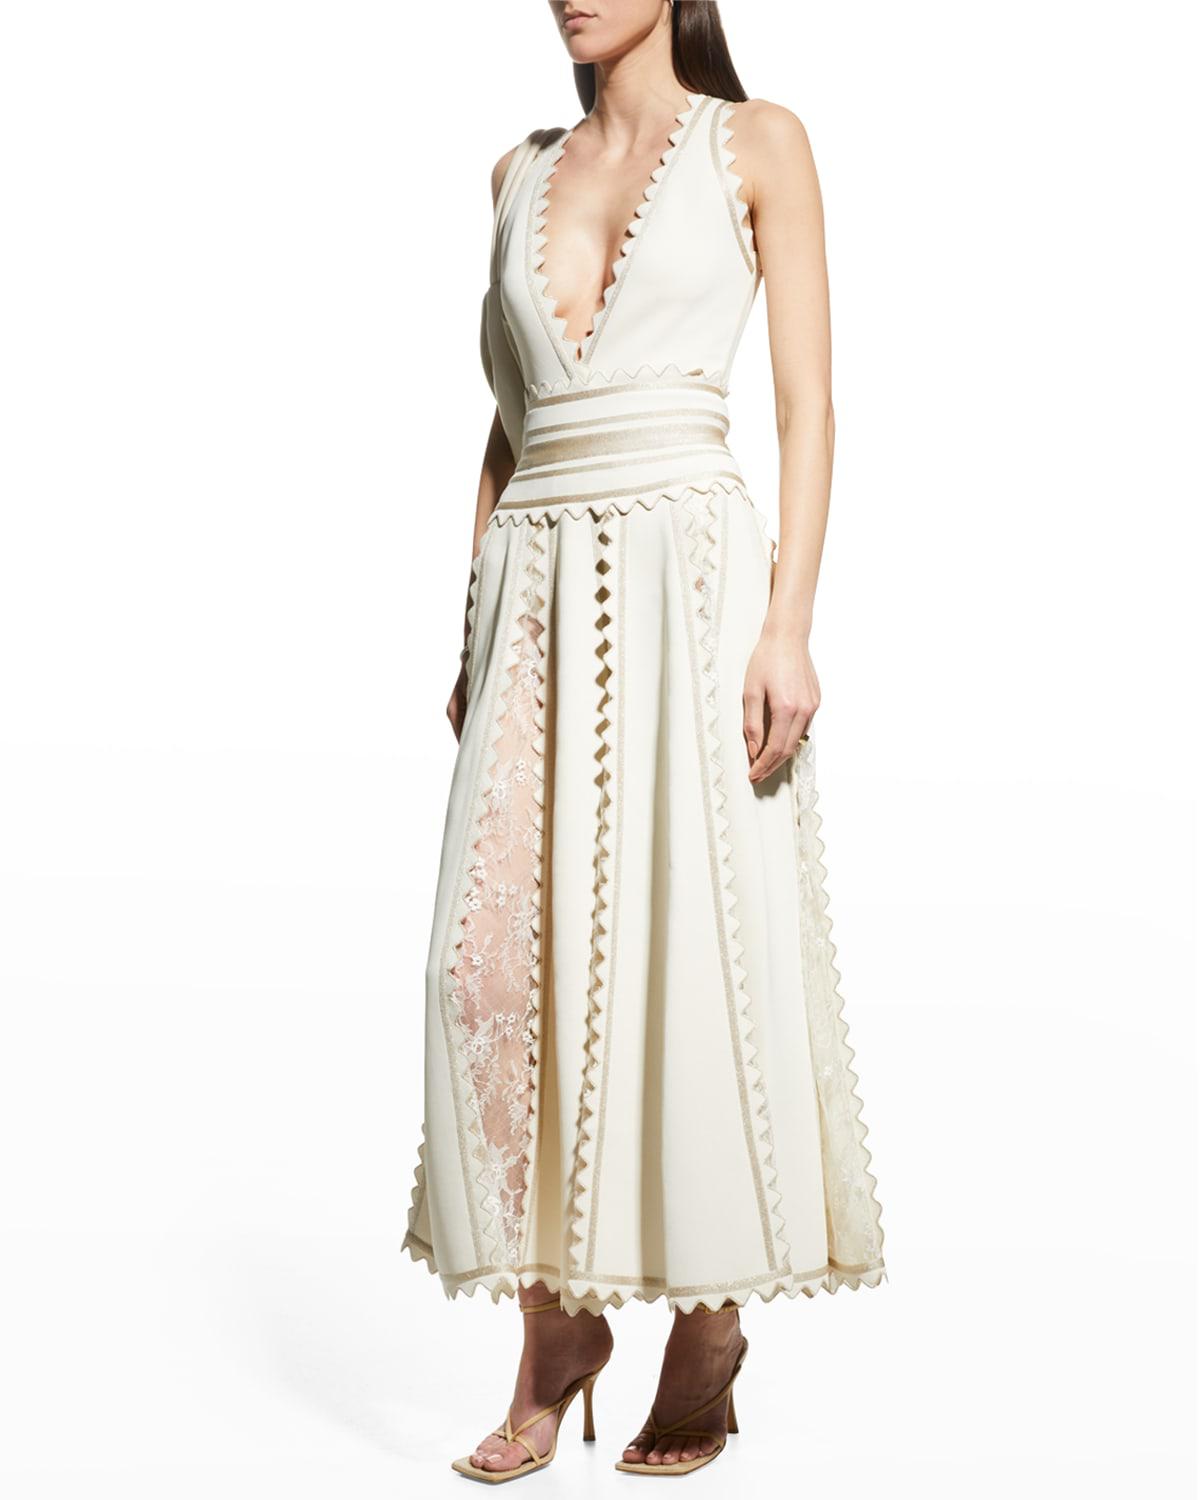 Lace-Insert Scalloped Metallic Knit Maxi Skirt by ELIE SAAB